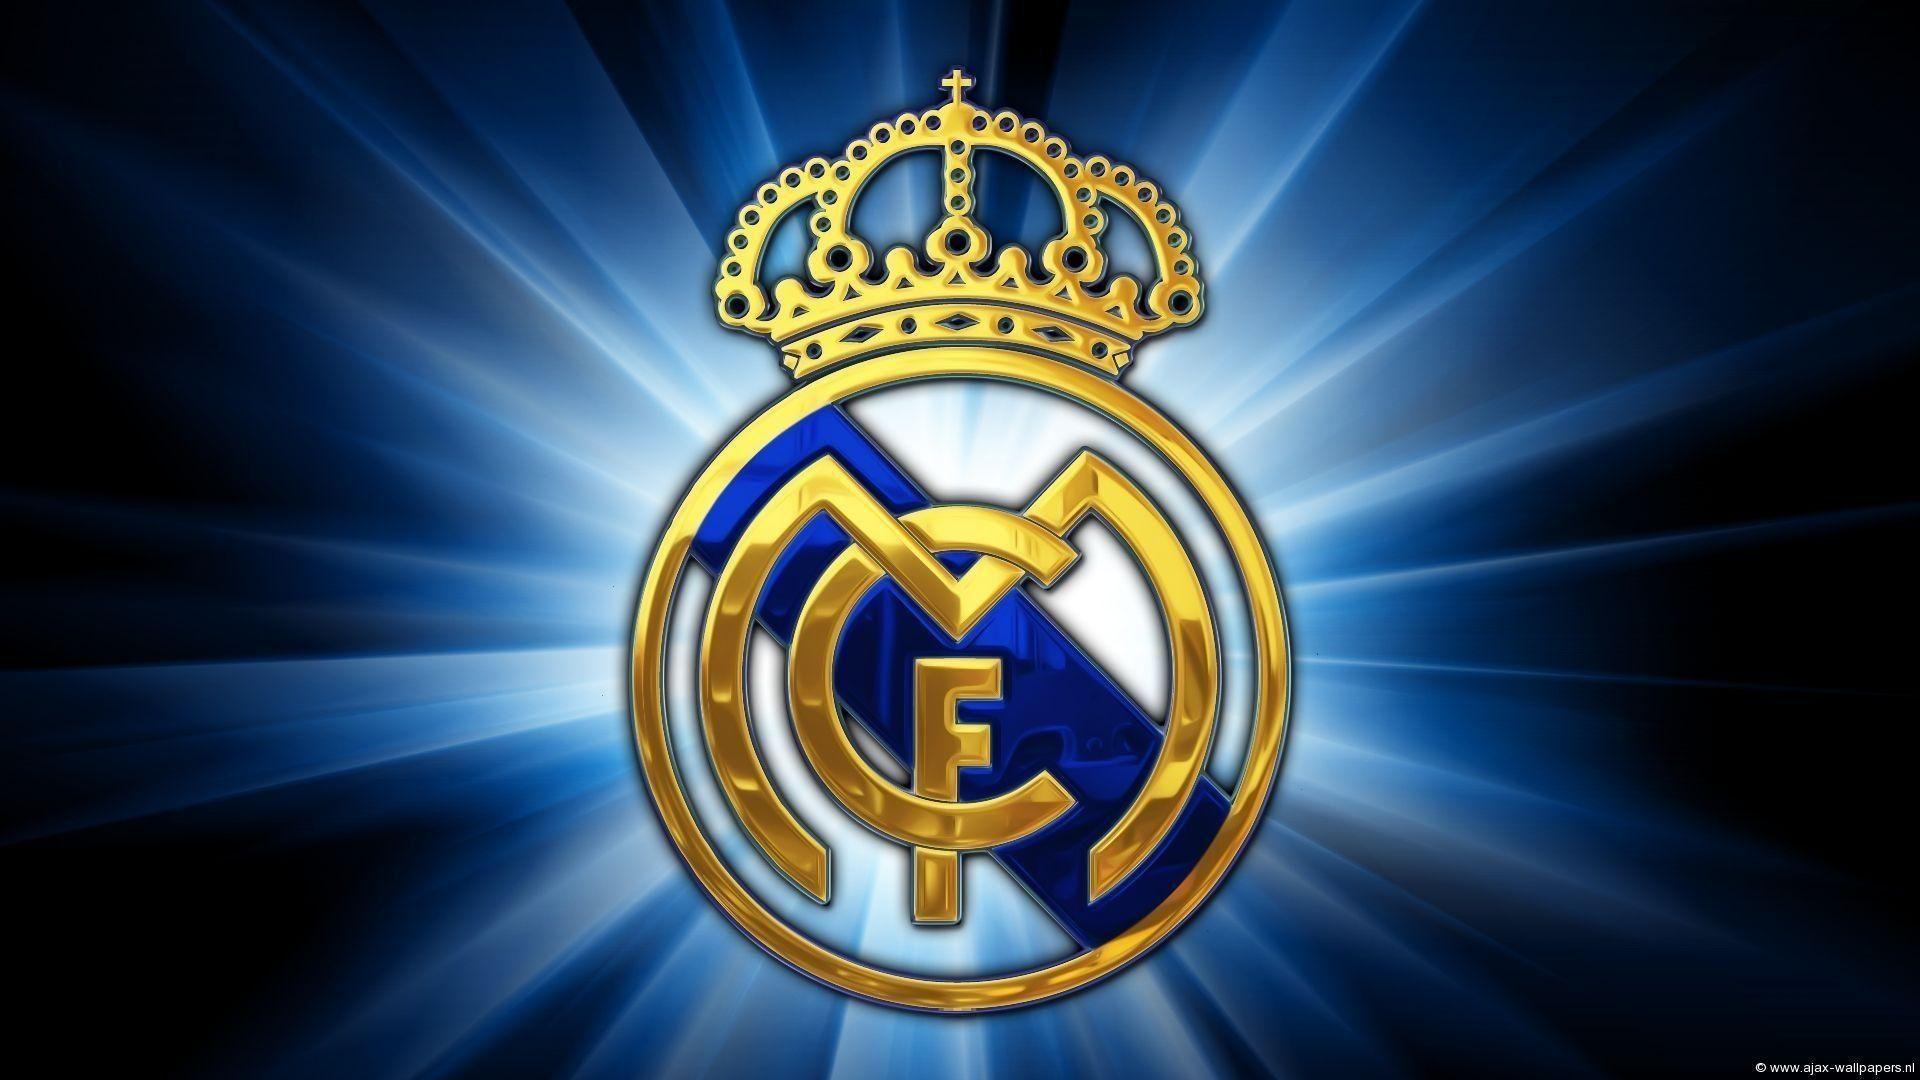 Best Cool Real Madrid Logo FULL HD 1080p For PC Background. Madrid wallpaper, Real madrid logo wallpaper, Real madrid logo